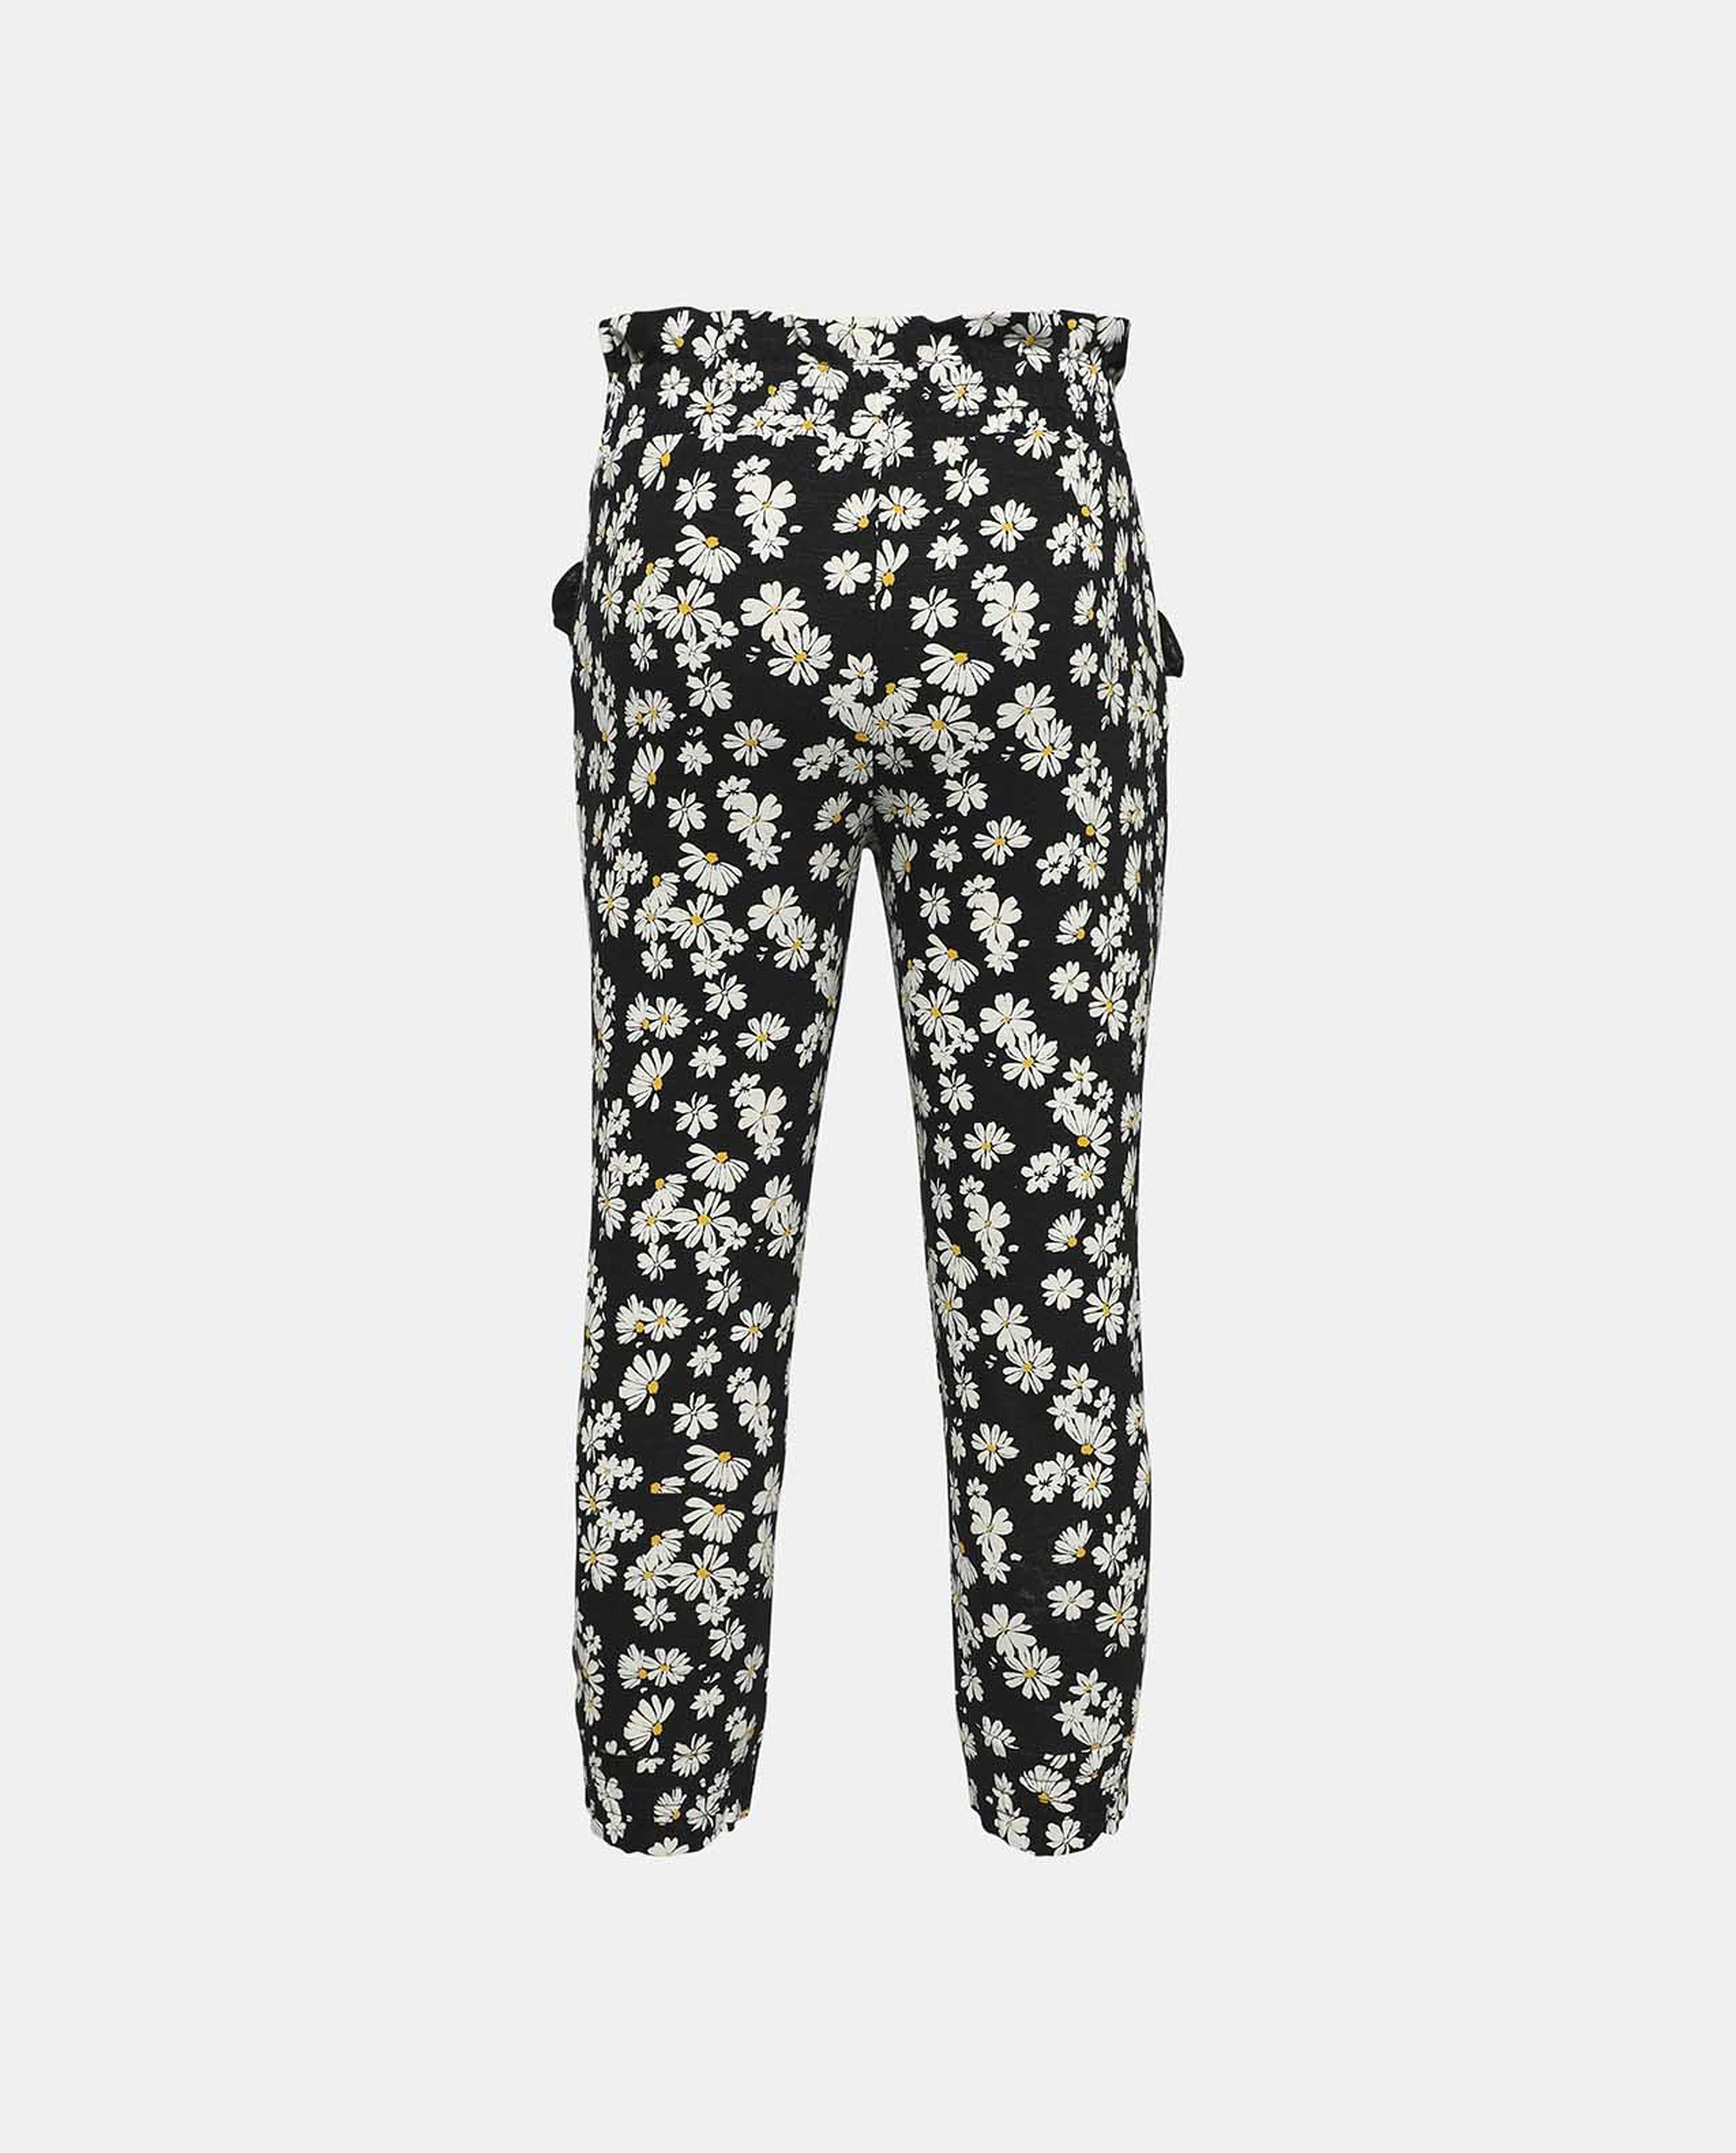 Black All Over Printed Pants